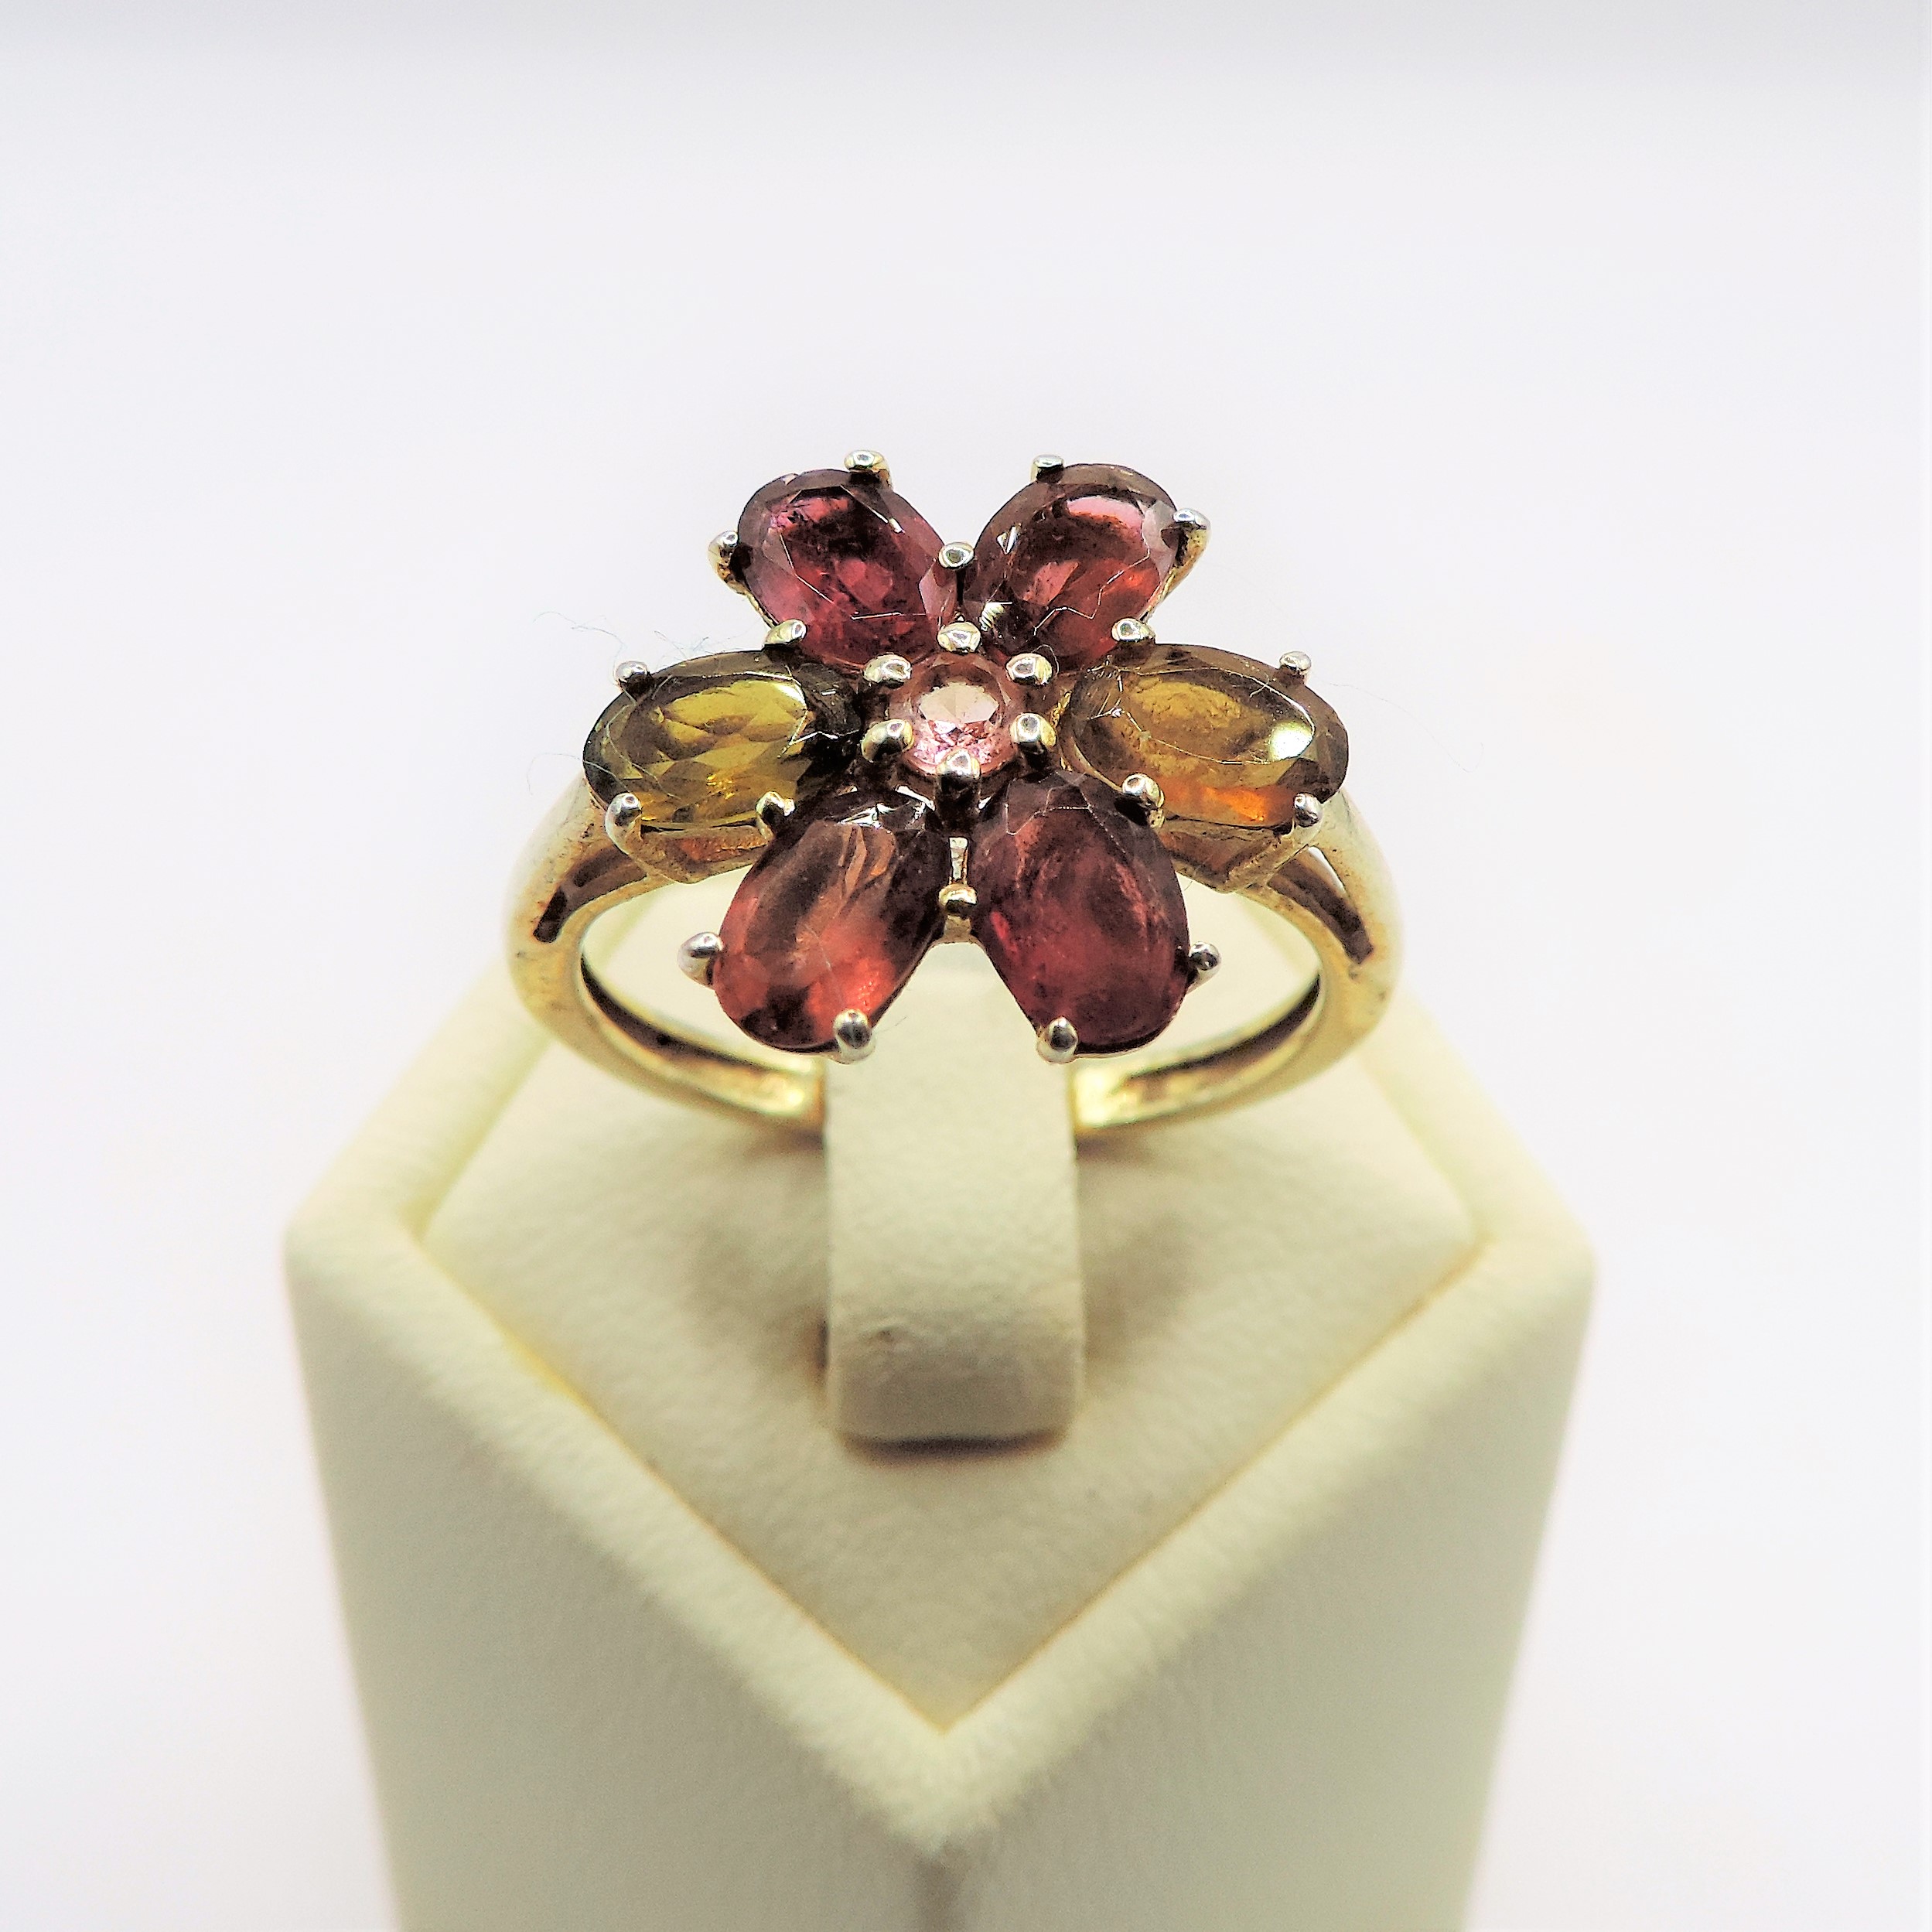 Gold on Sterling Silver Multi Colour Tourmaline Gemstone Ring New with Gift Pouch - Image 4 of 4